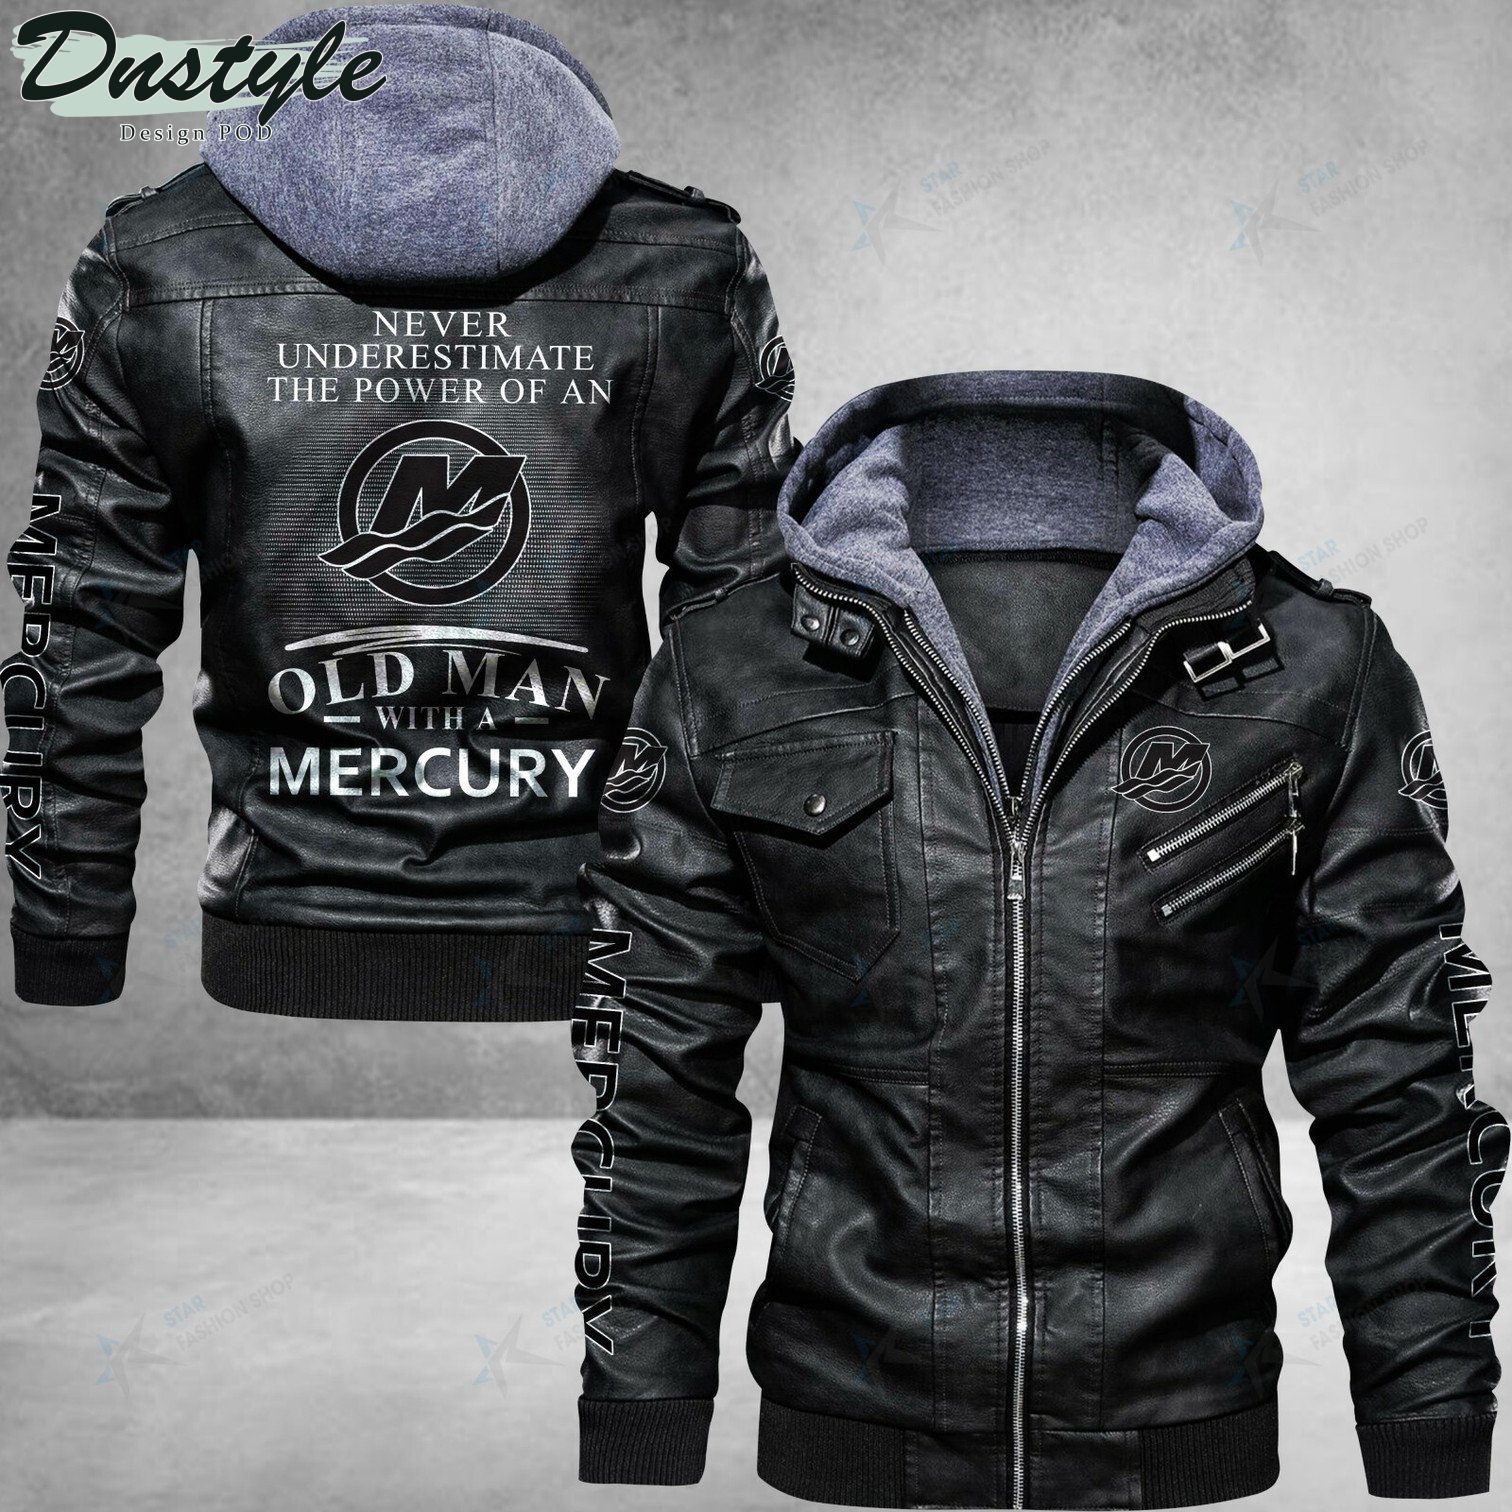 Mercury Marine never underestimate the power of an old man leather jacket